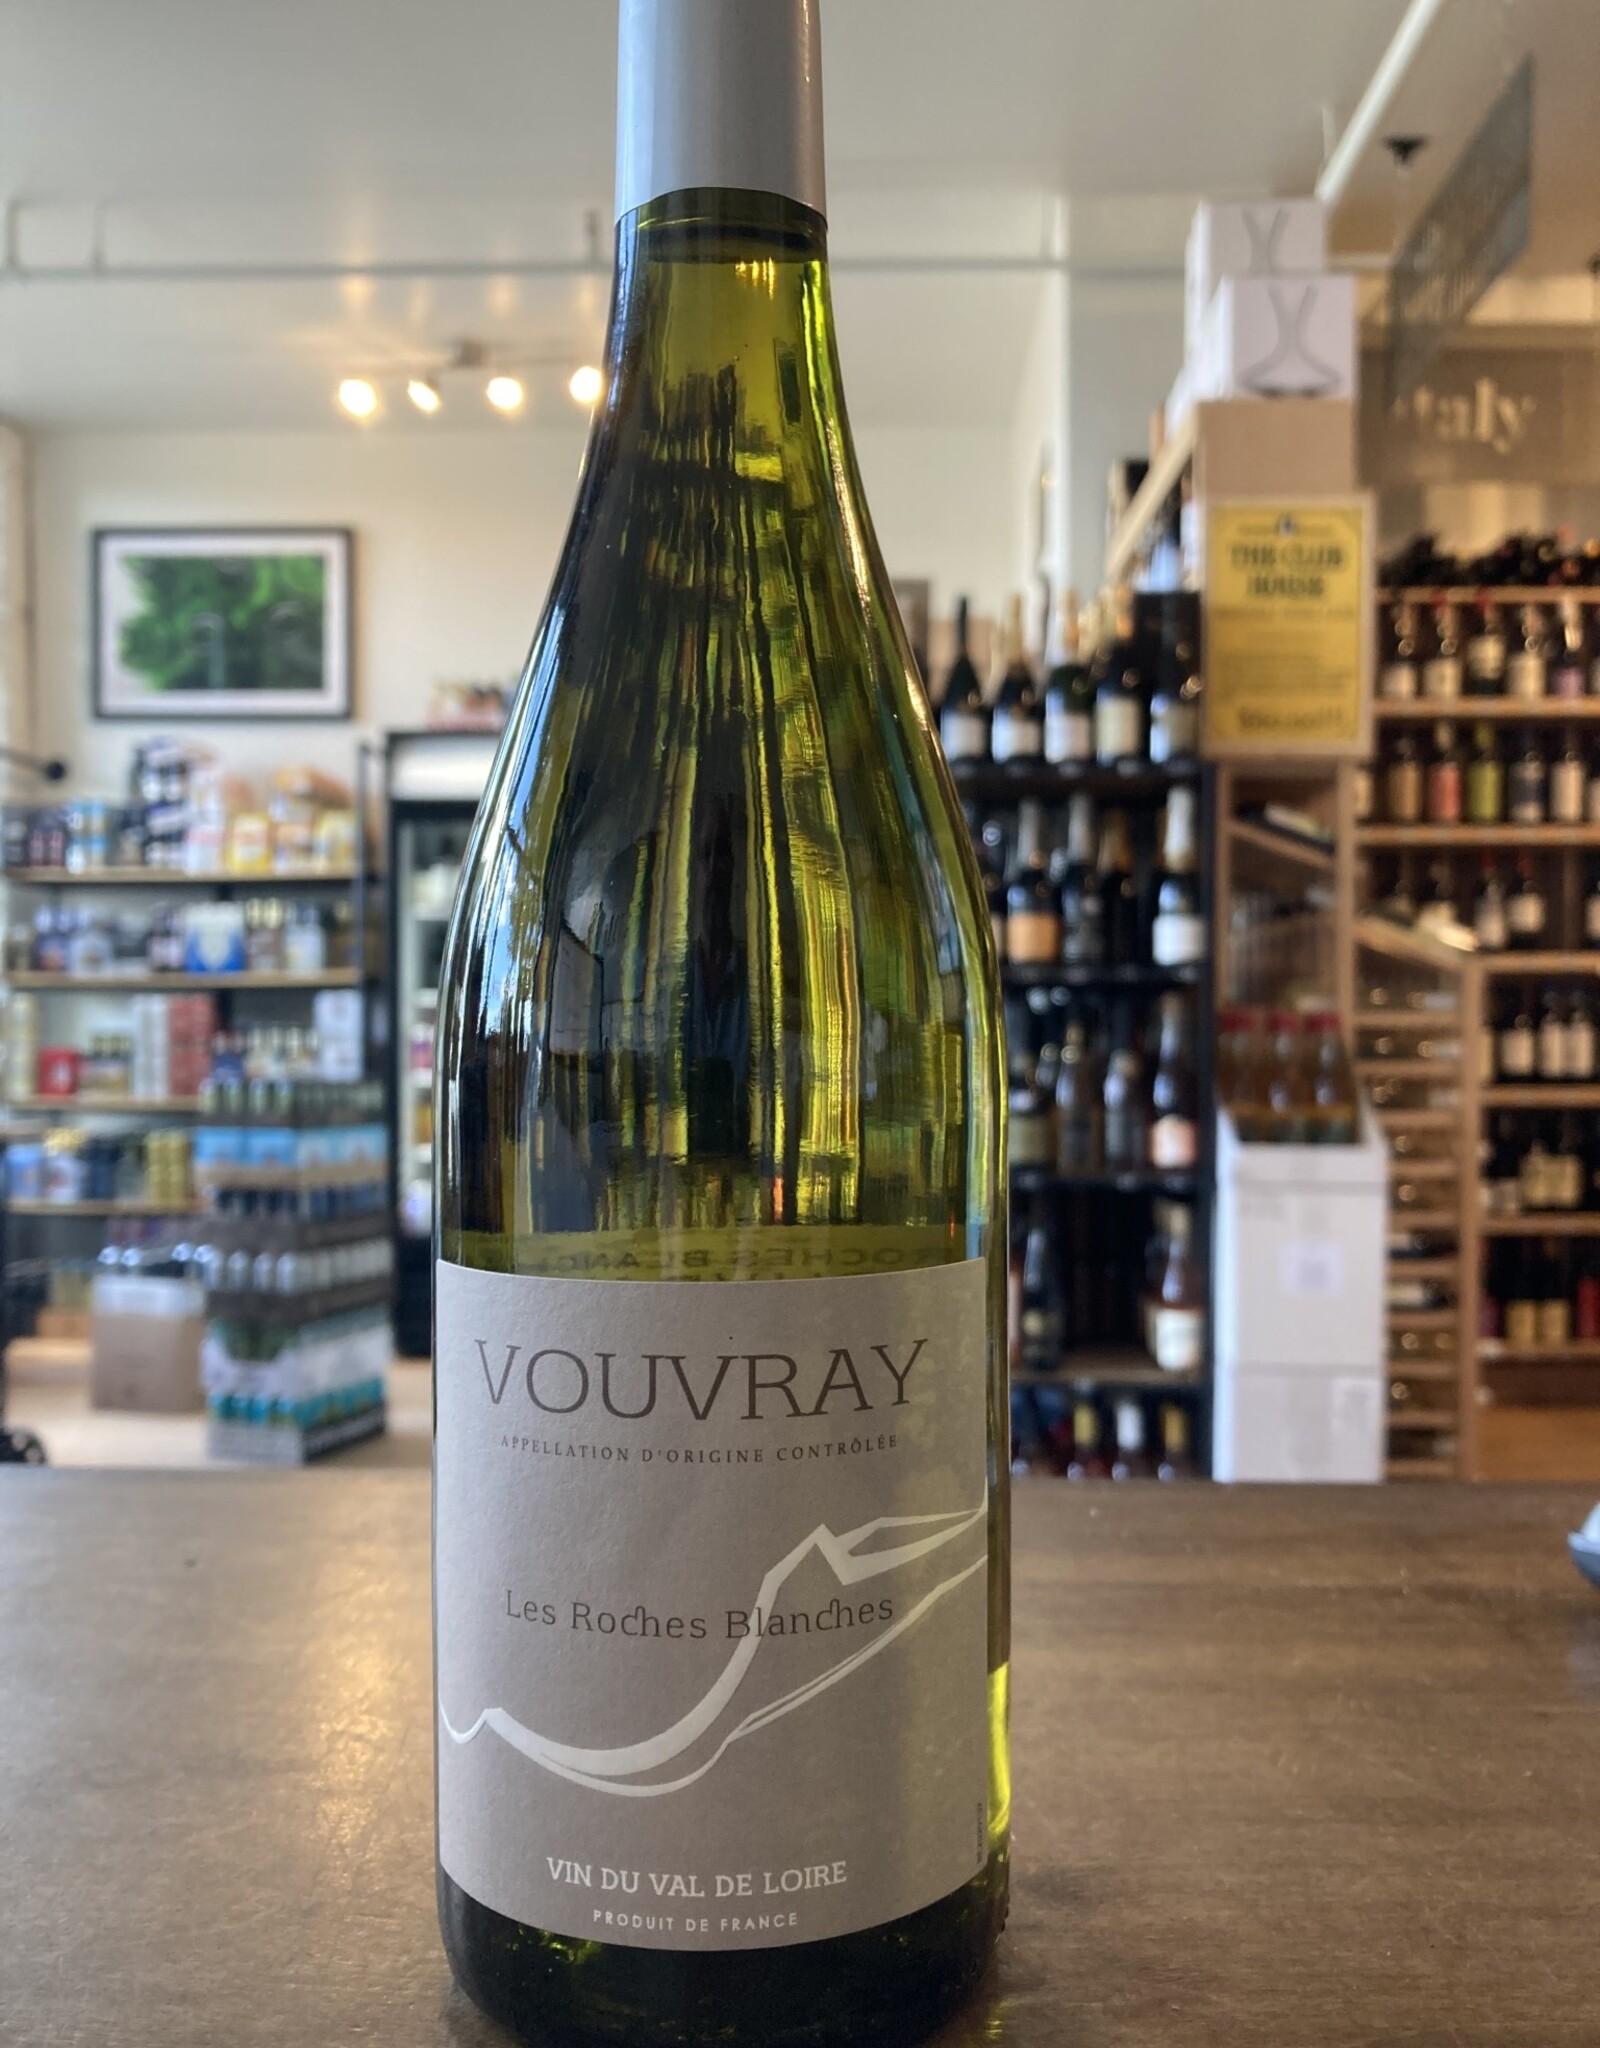 Les Roches Blanches Vouvray 2020